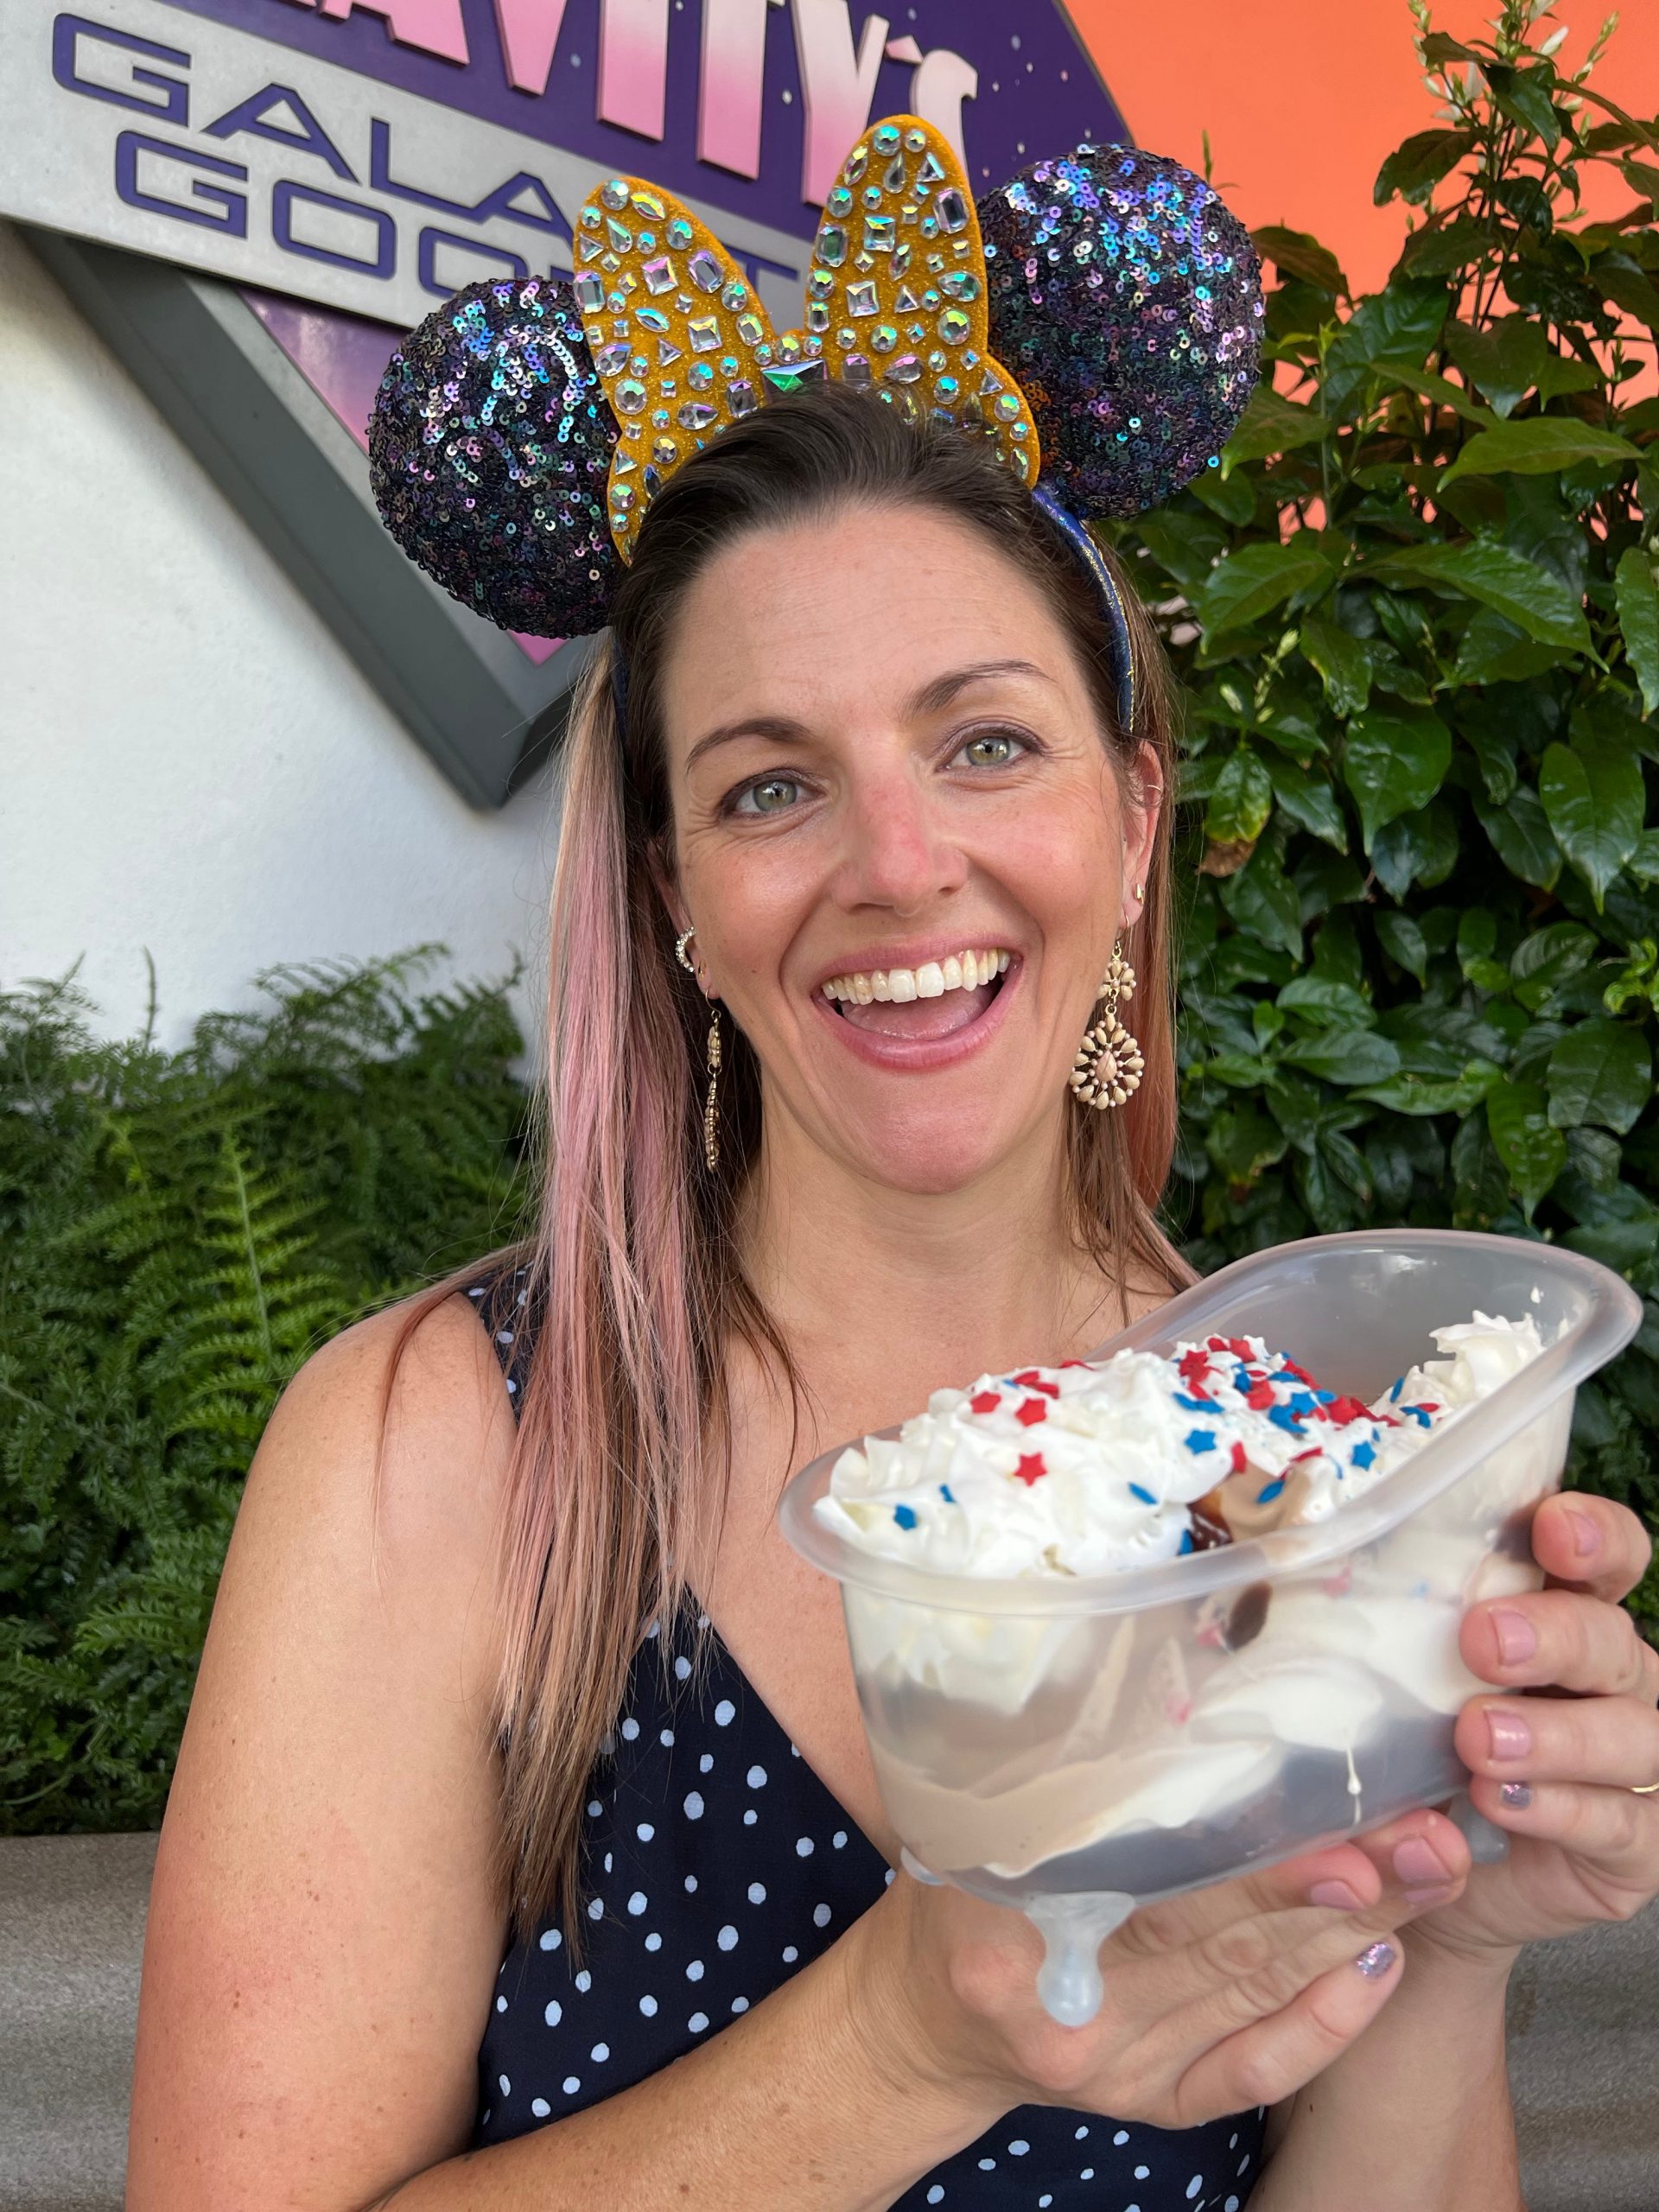 The author, Tarah Chieffi, wearing blue and gold mouse ears and holding the white sundae.